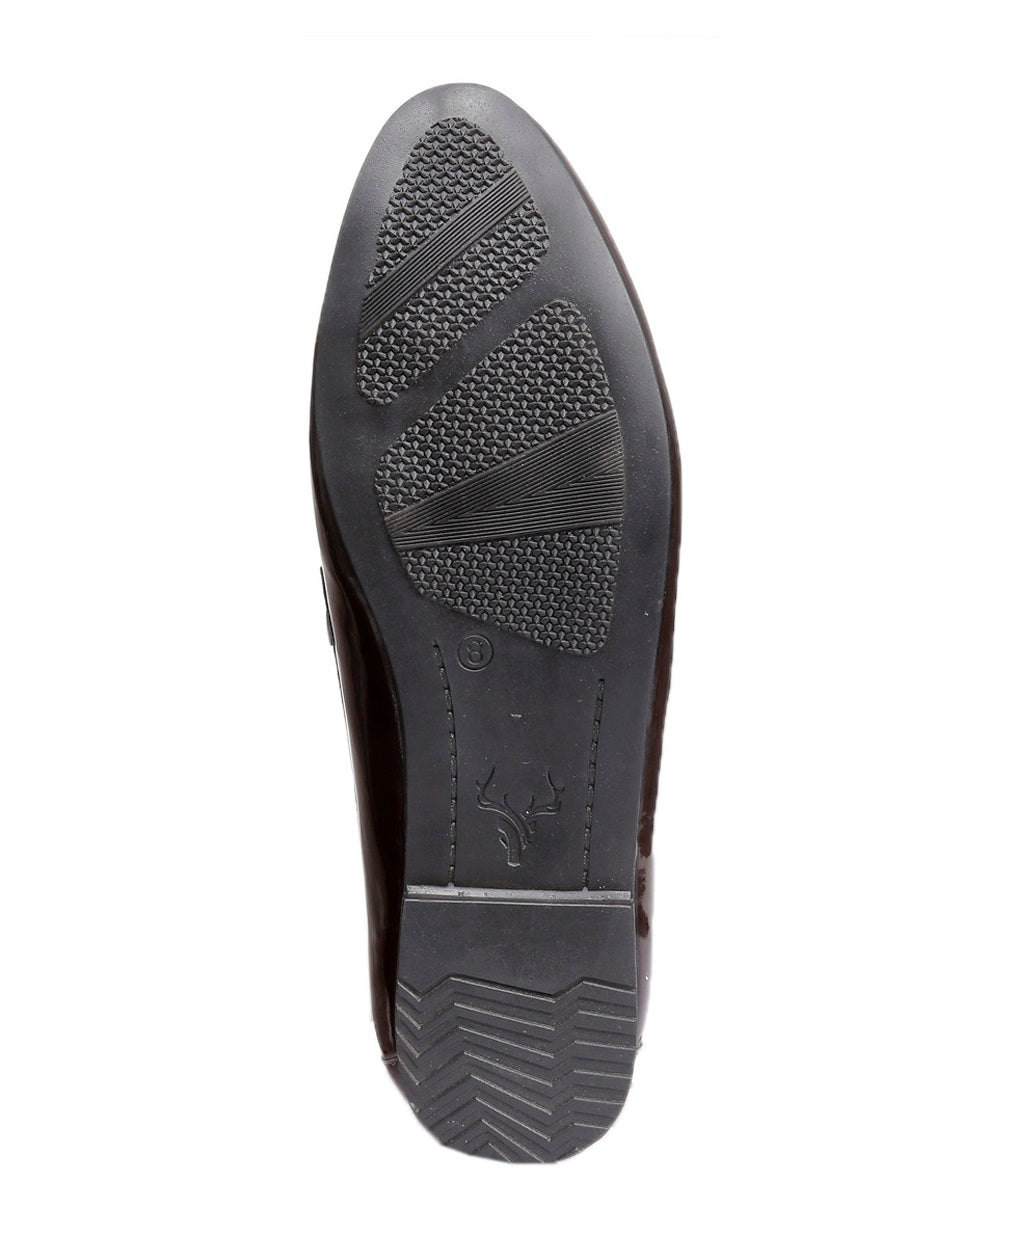 BXXY Men's Casual Party Wear Loafer & Moccasins